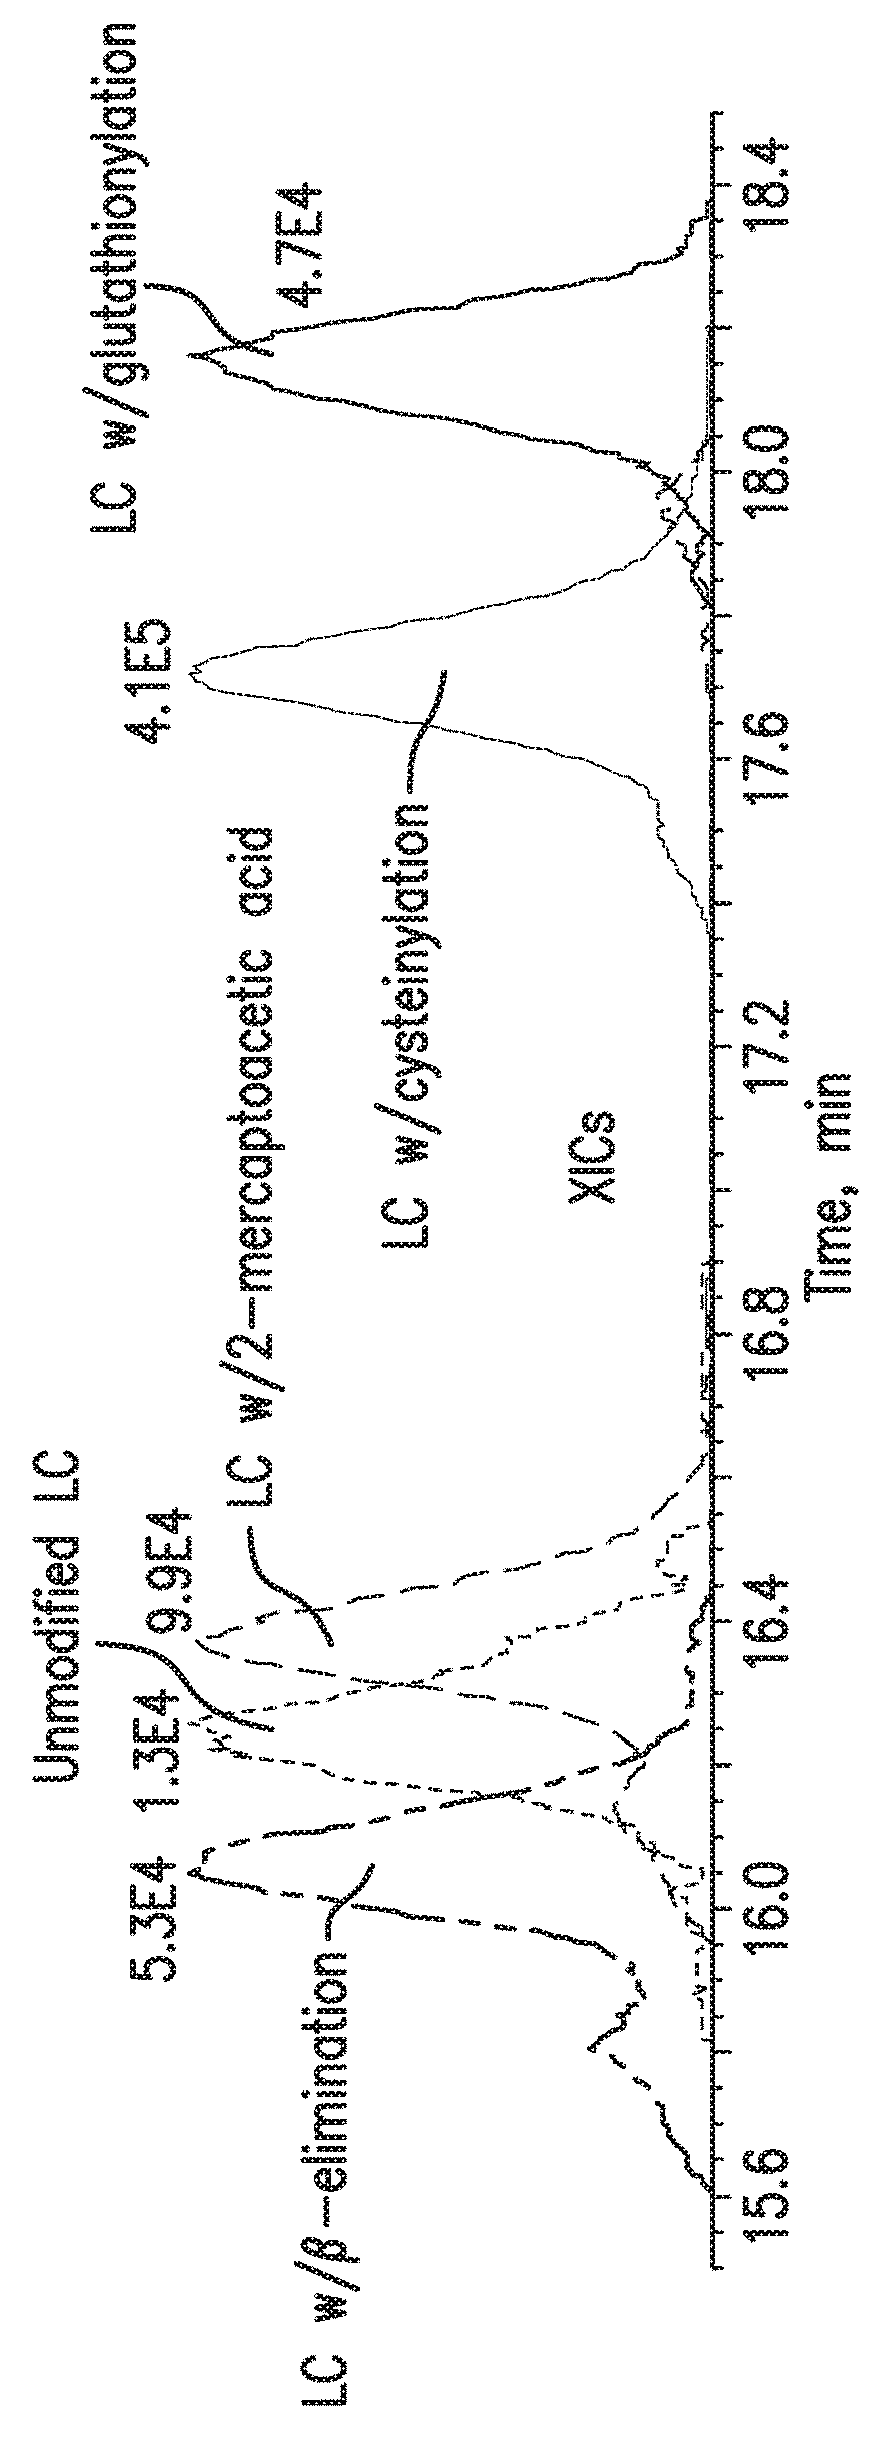 System and method for characterizing drug product impurities